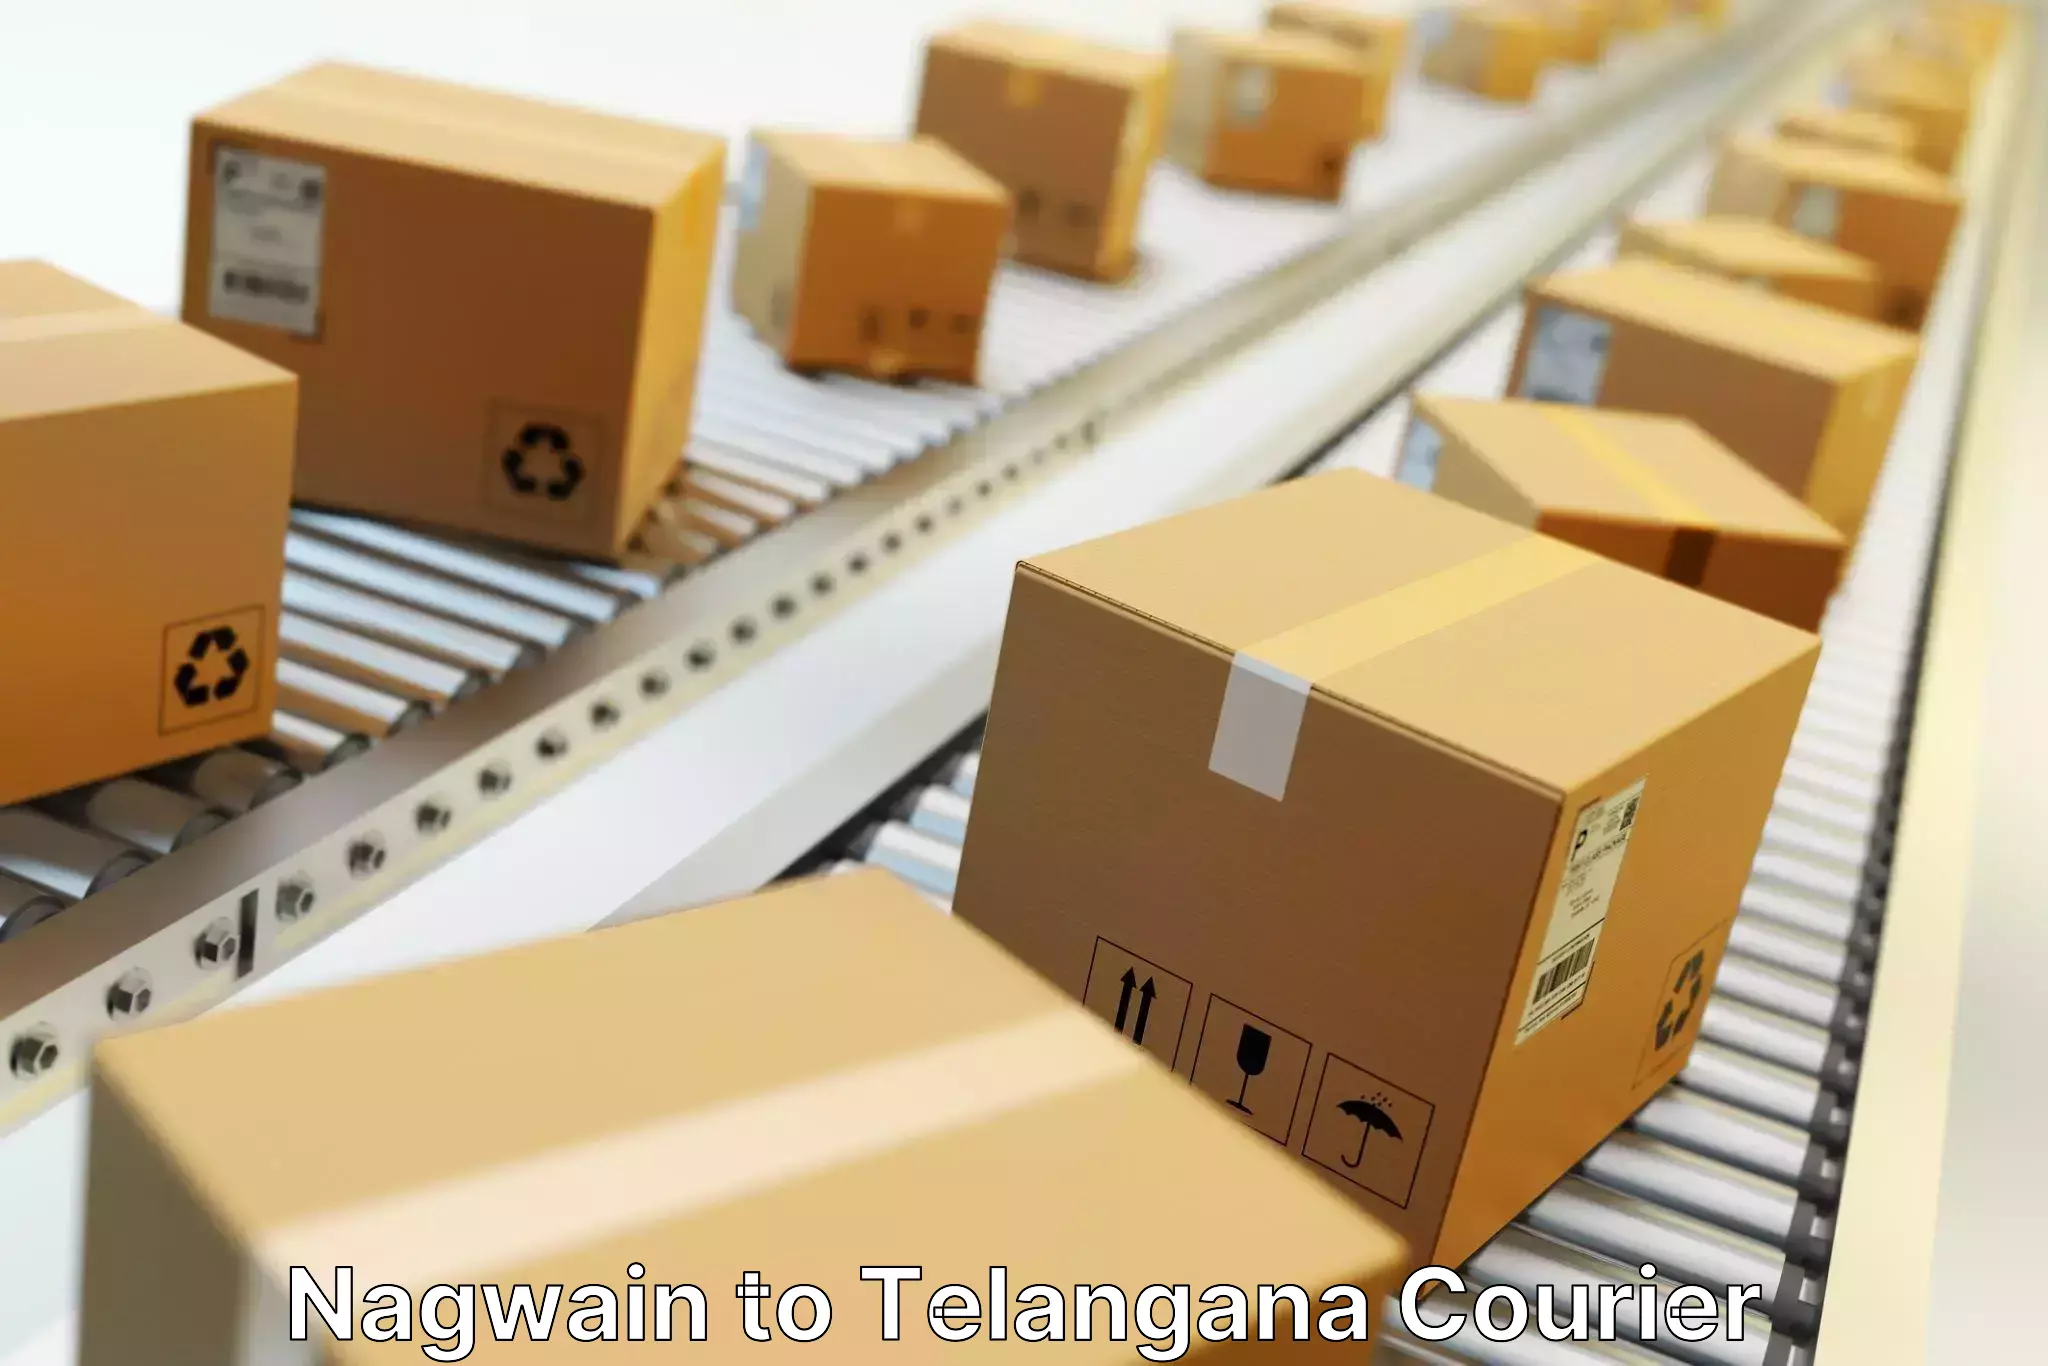 Customer-oriented courier services Nagwain to Gangadhara